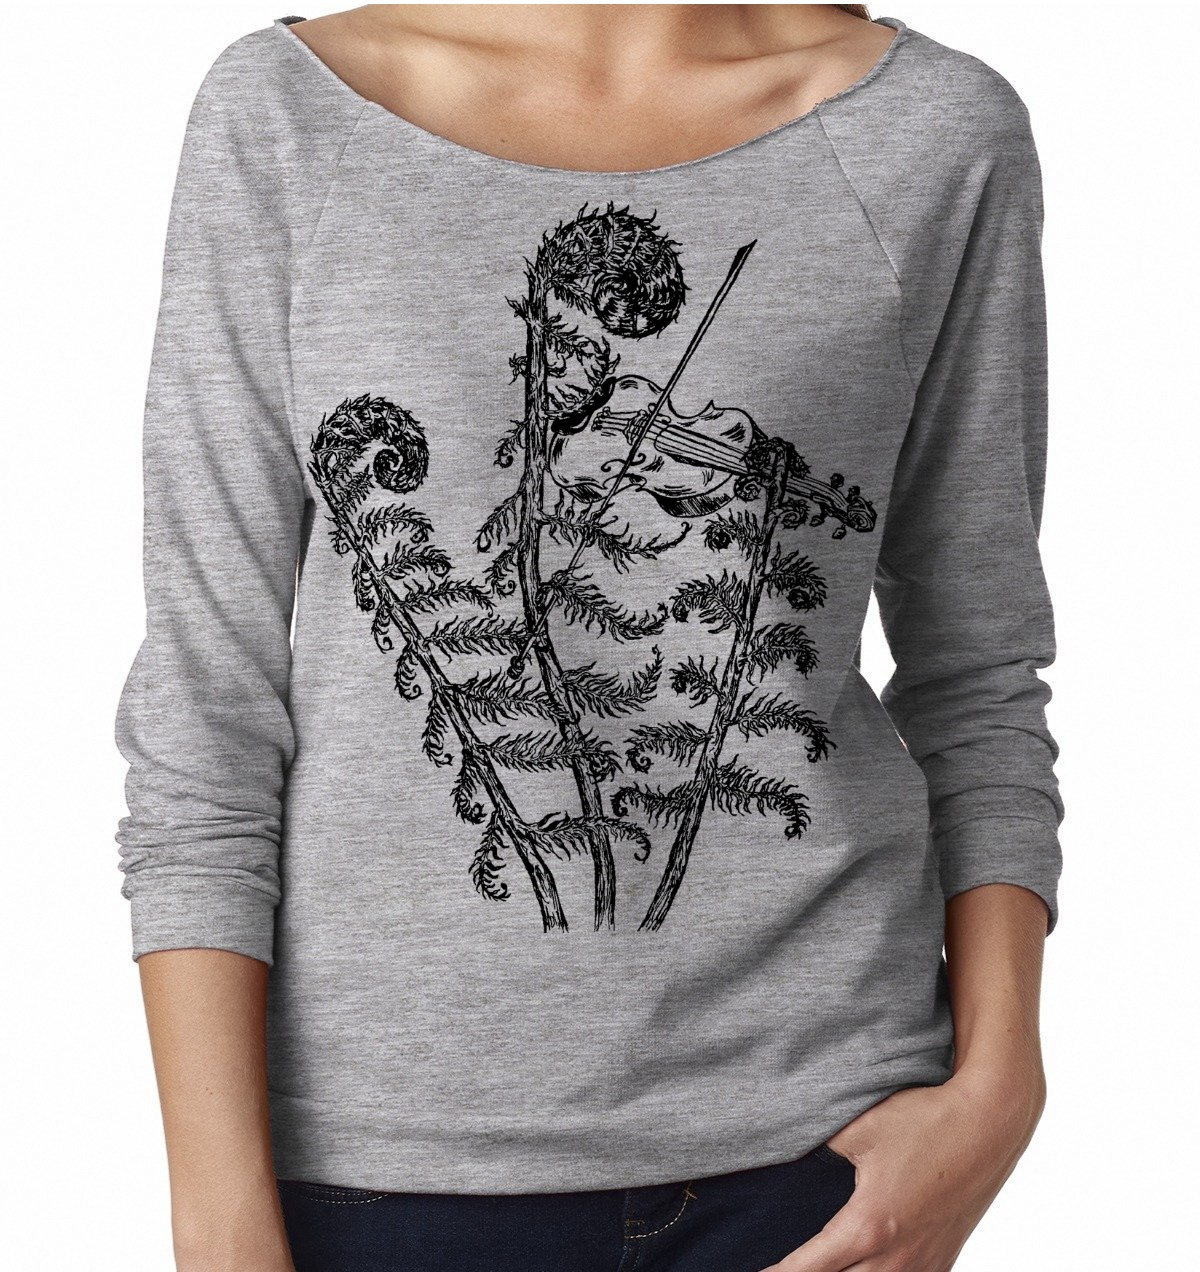 Fiddleheads Playing the Fiddle Ladies 3/4 Sleeve Boatneck Shirt